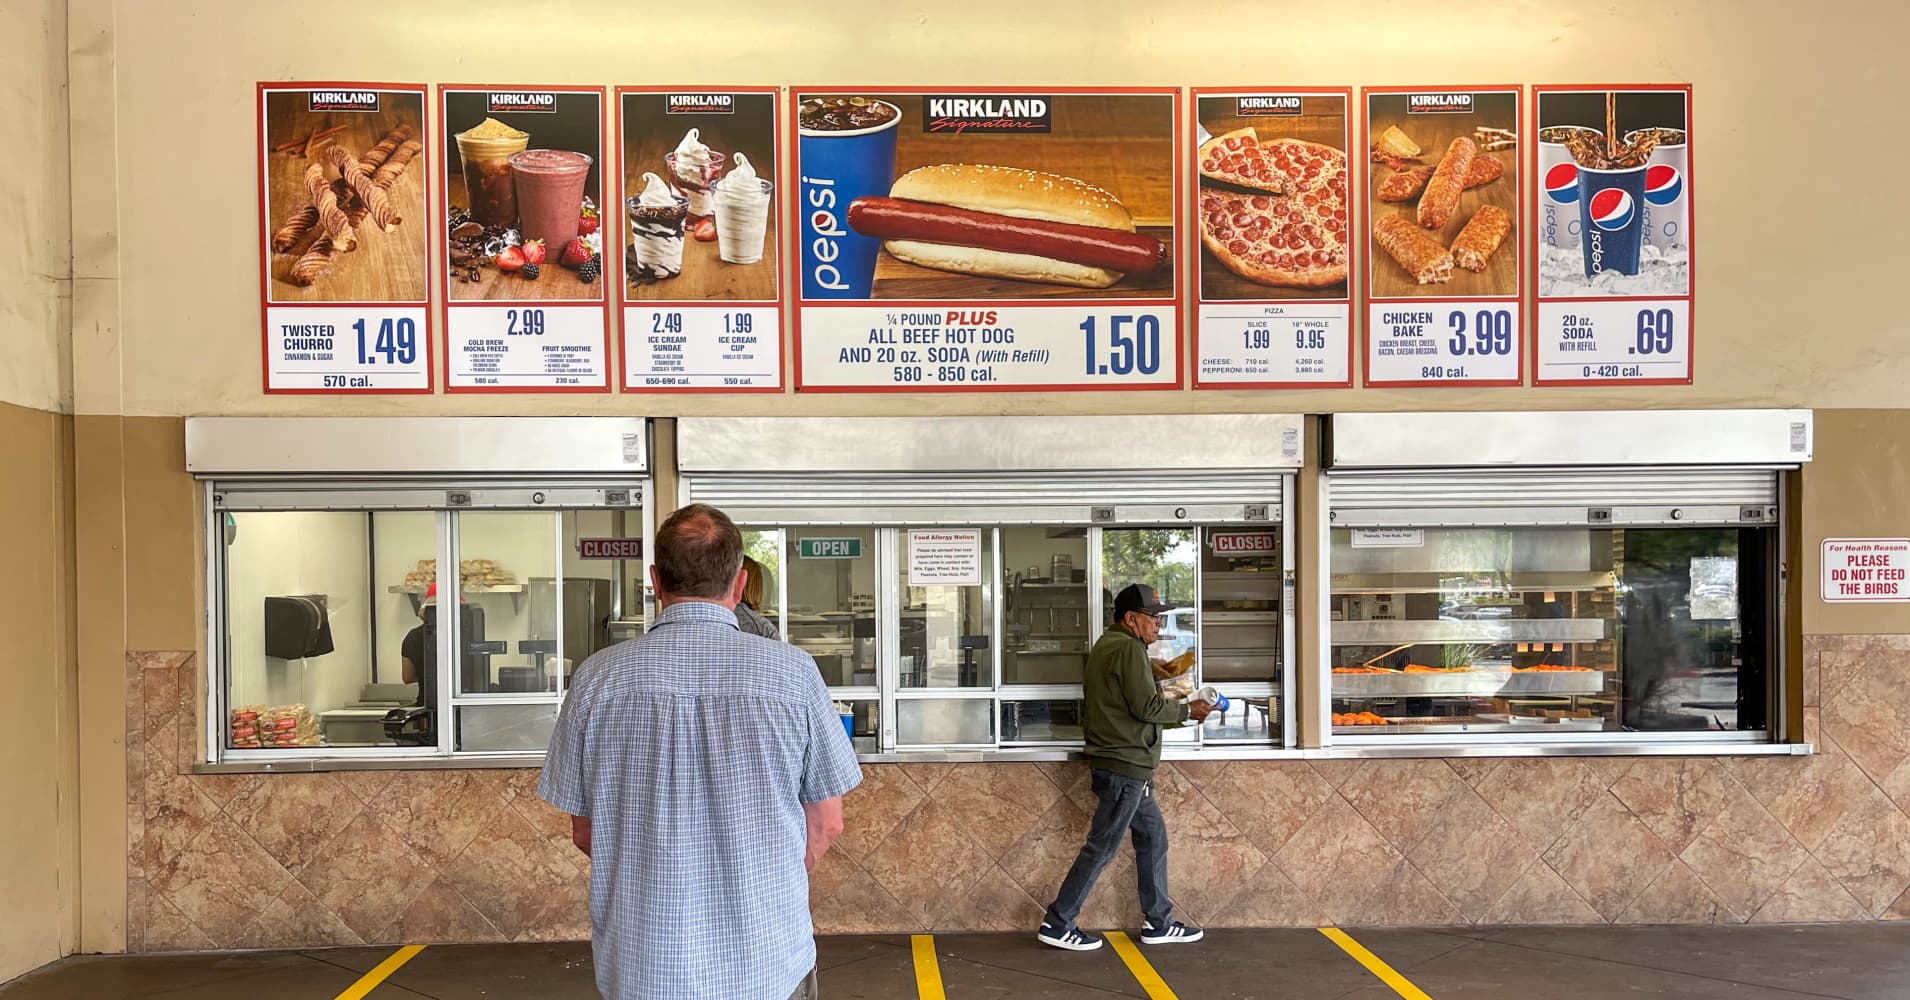 non-members will no longer be able to buy costco's iconic $1.50 hot dog combo